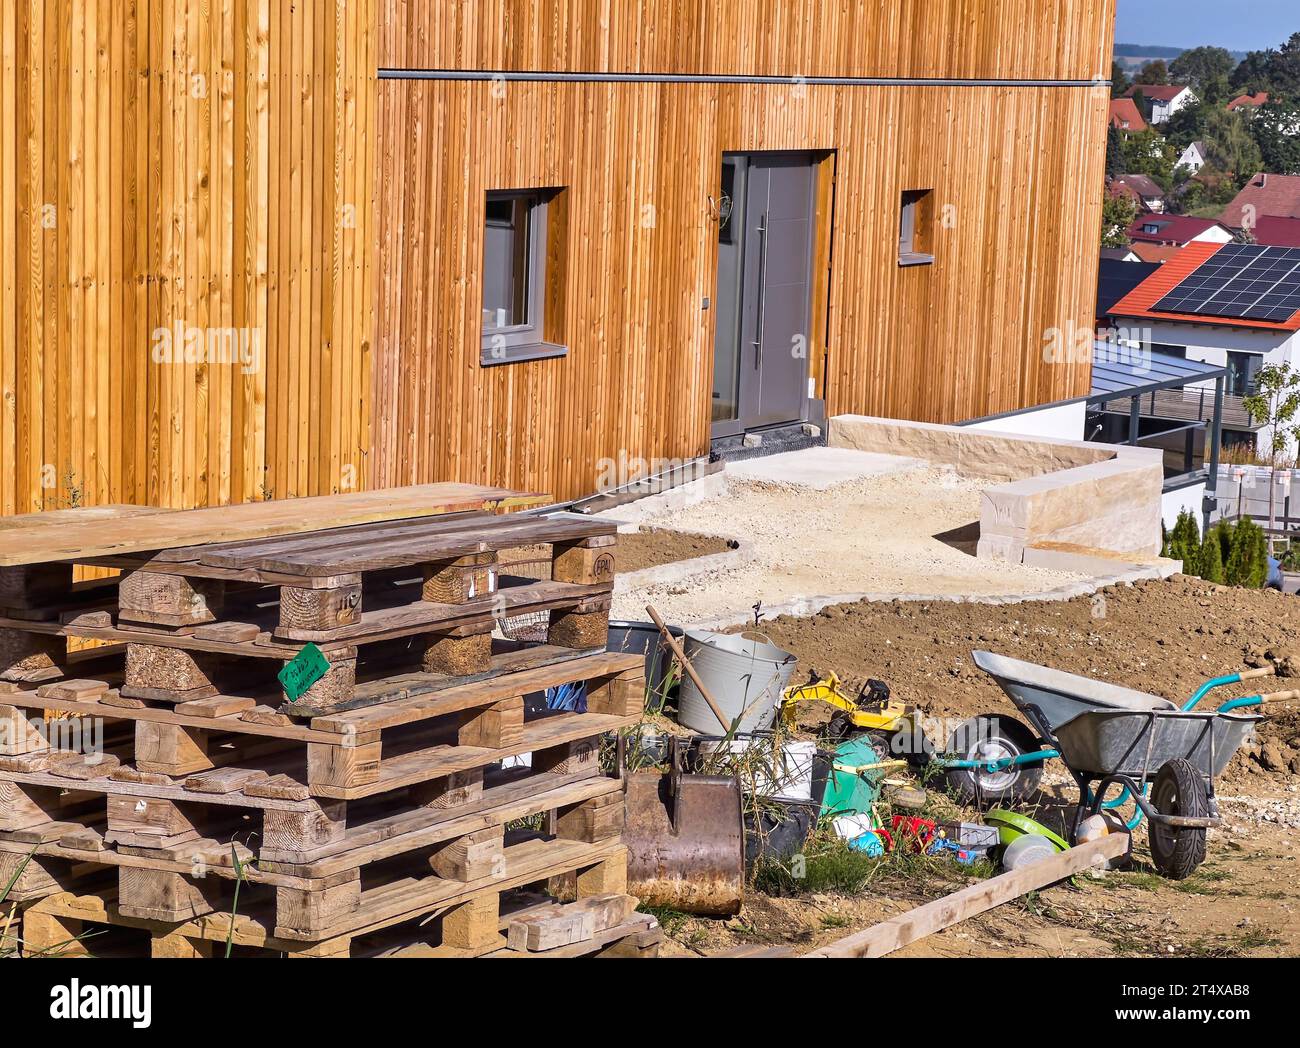 Construction site with a wooden house in Pfaffenhofen a.d.Ilm, Bavaria, Germany, Oct 08, 2023. Credit: Imago/Alamy Live News Stock Photo